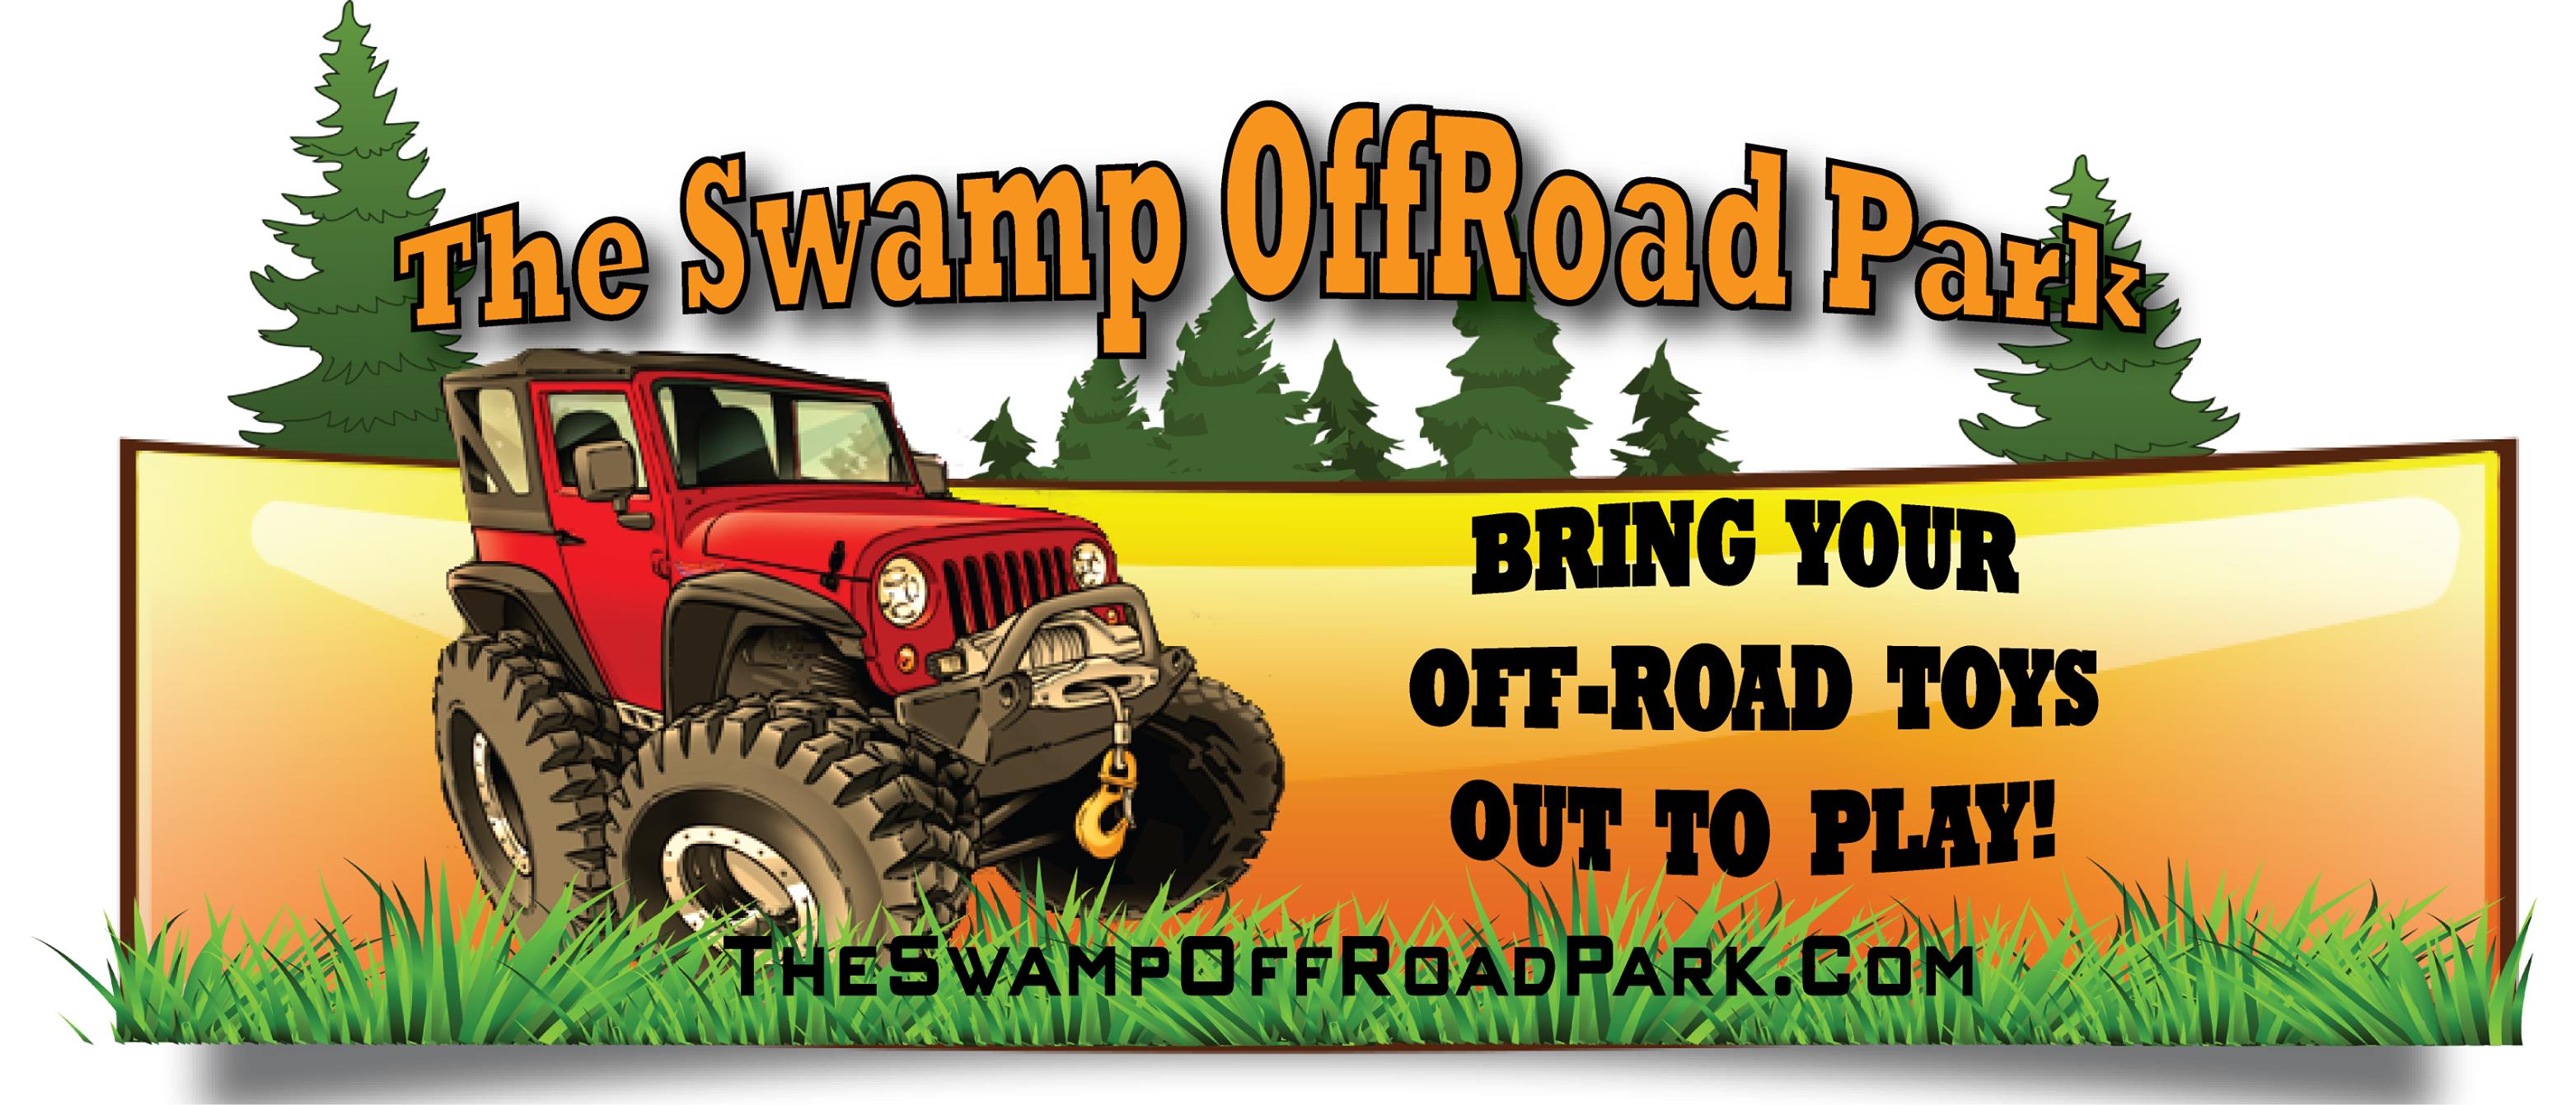 The Swamp OffRoad Park|Zoo and Wildlife Sanctuary |Travel